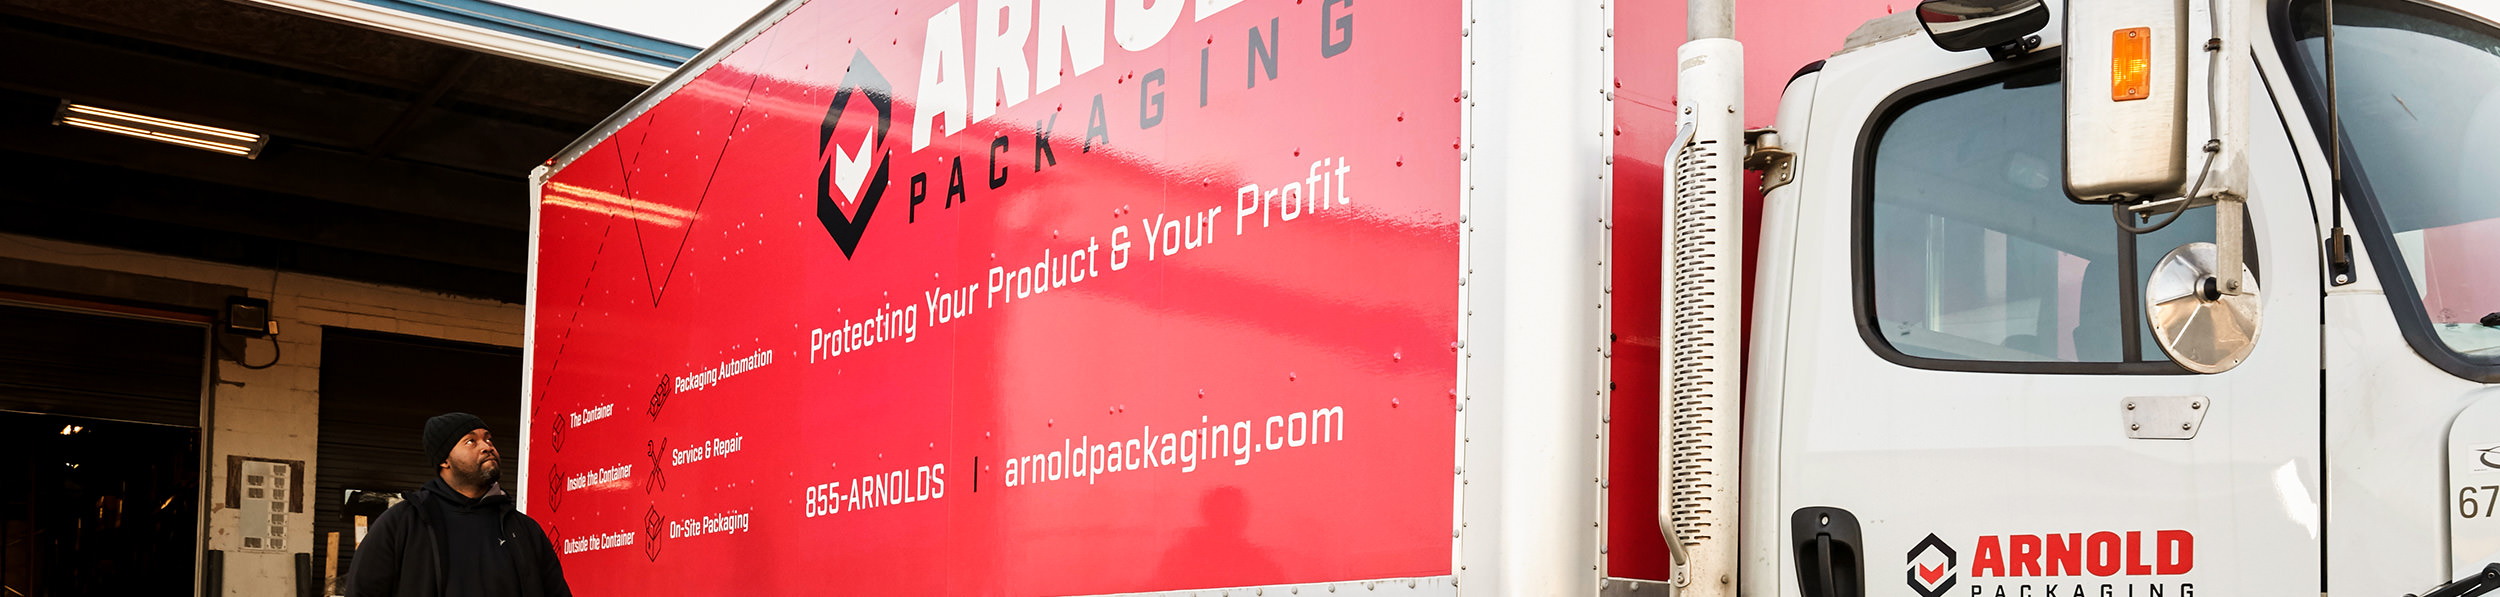 Arnold Packaging - Overview